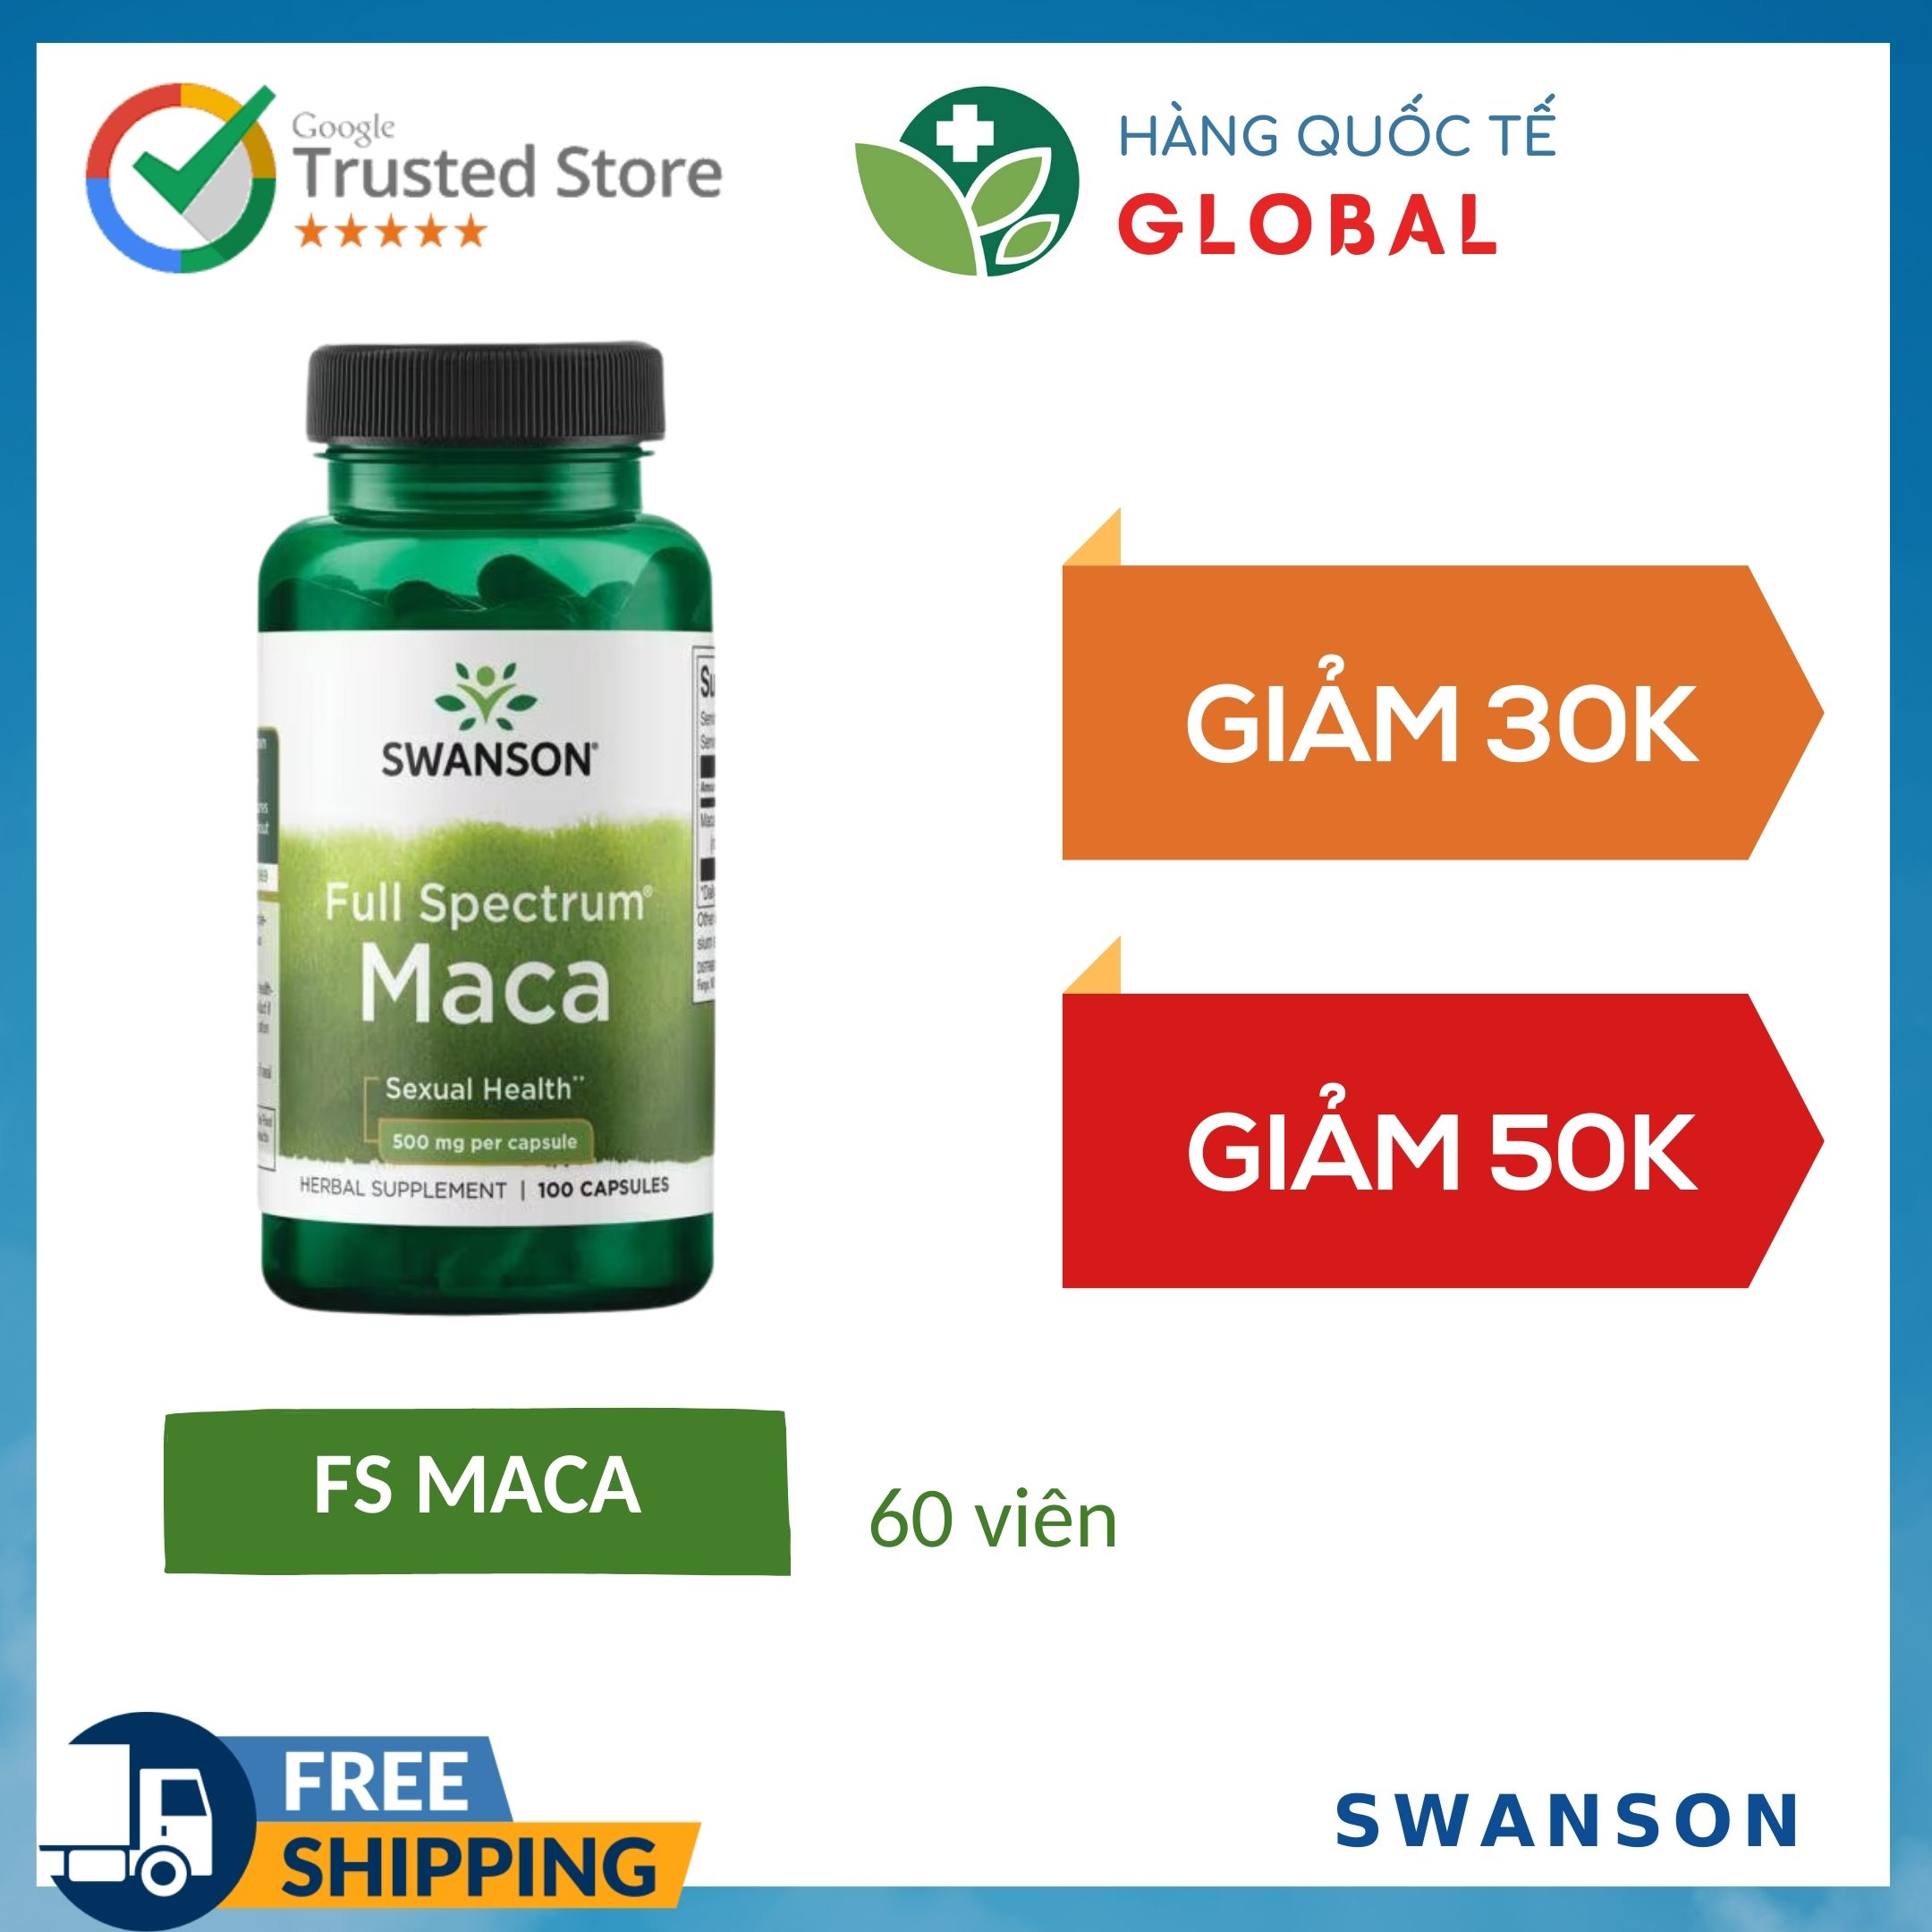 International Products SWANSON MACA 500mg, 100 tablets, Supports